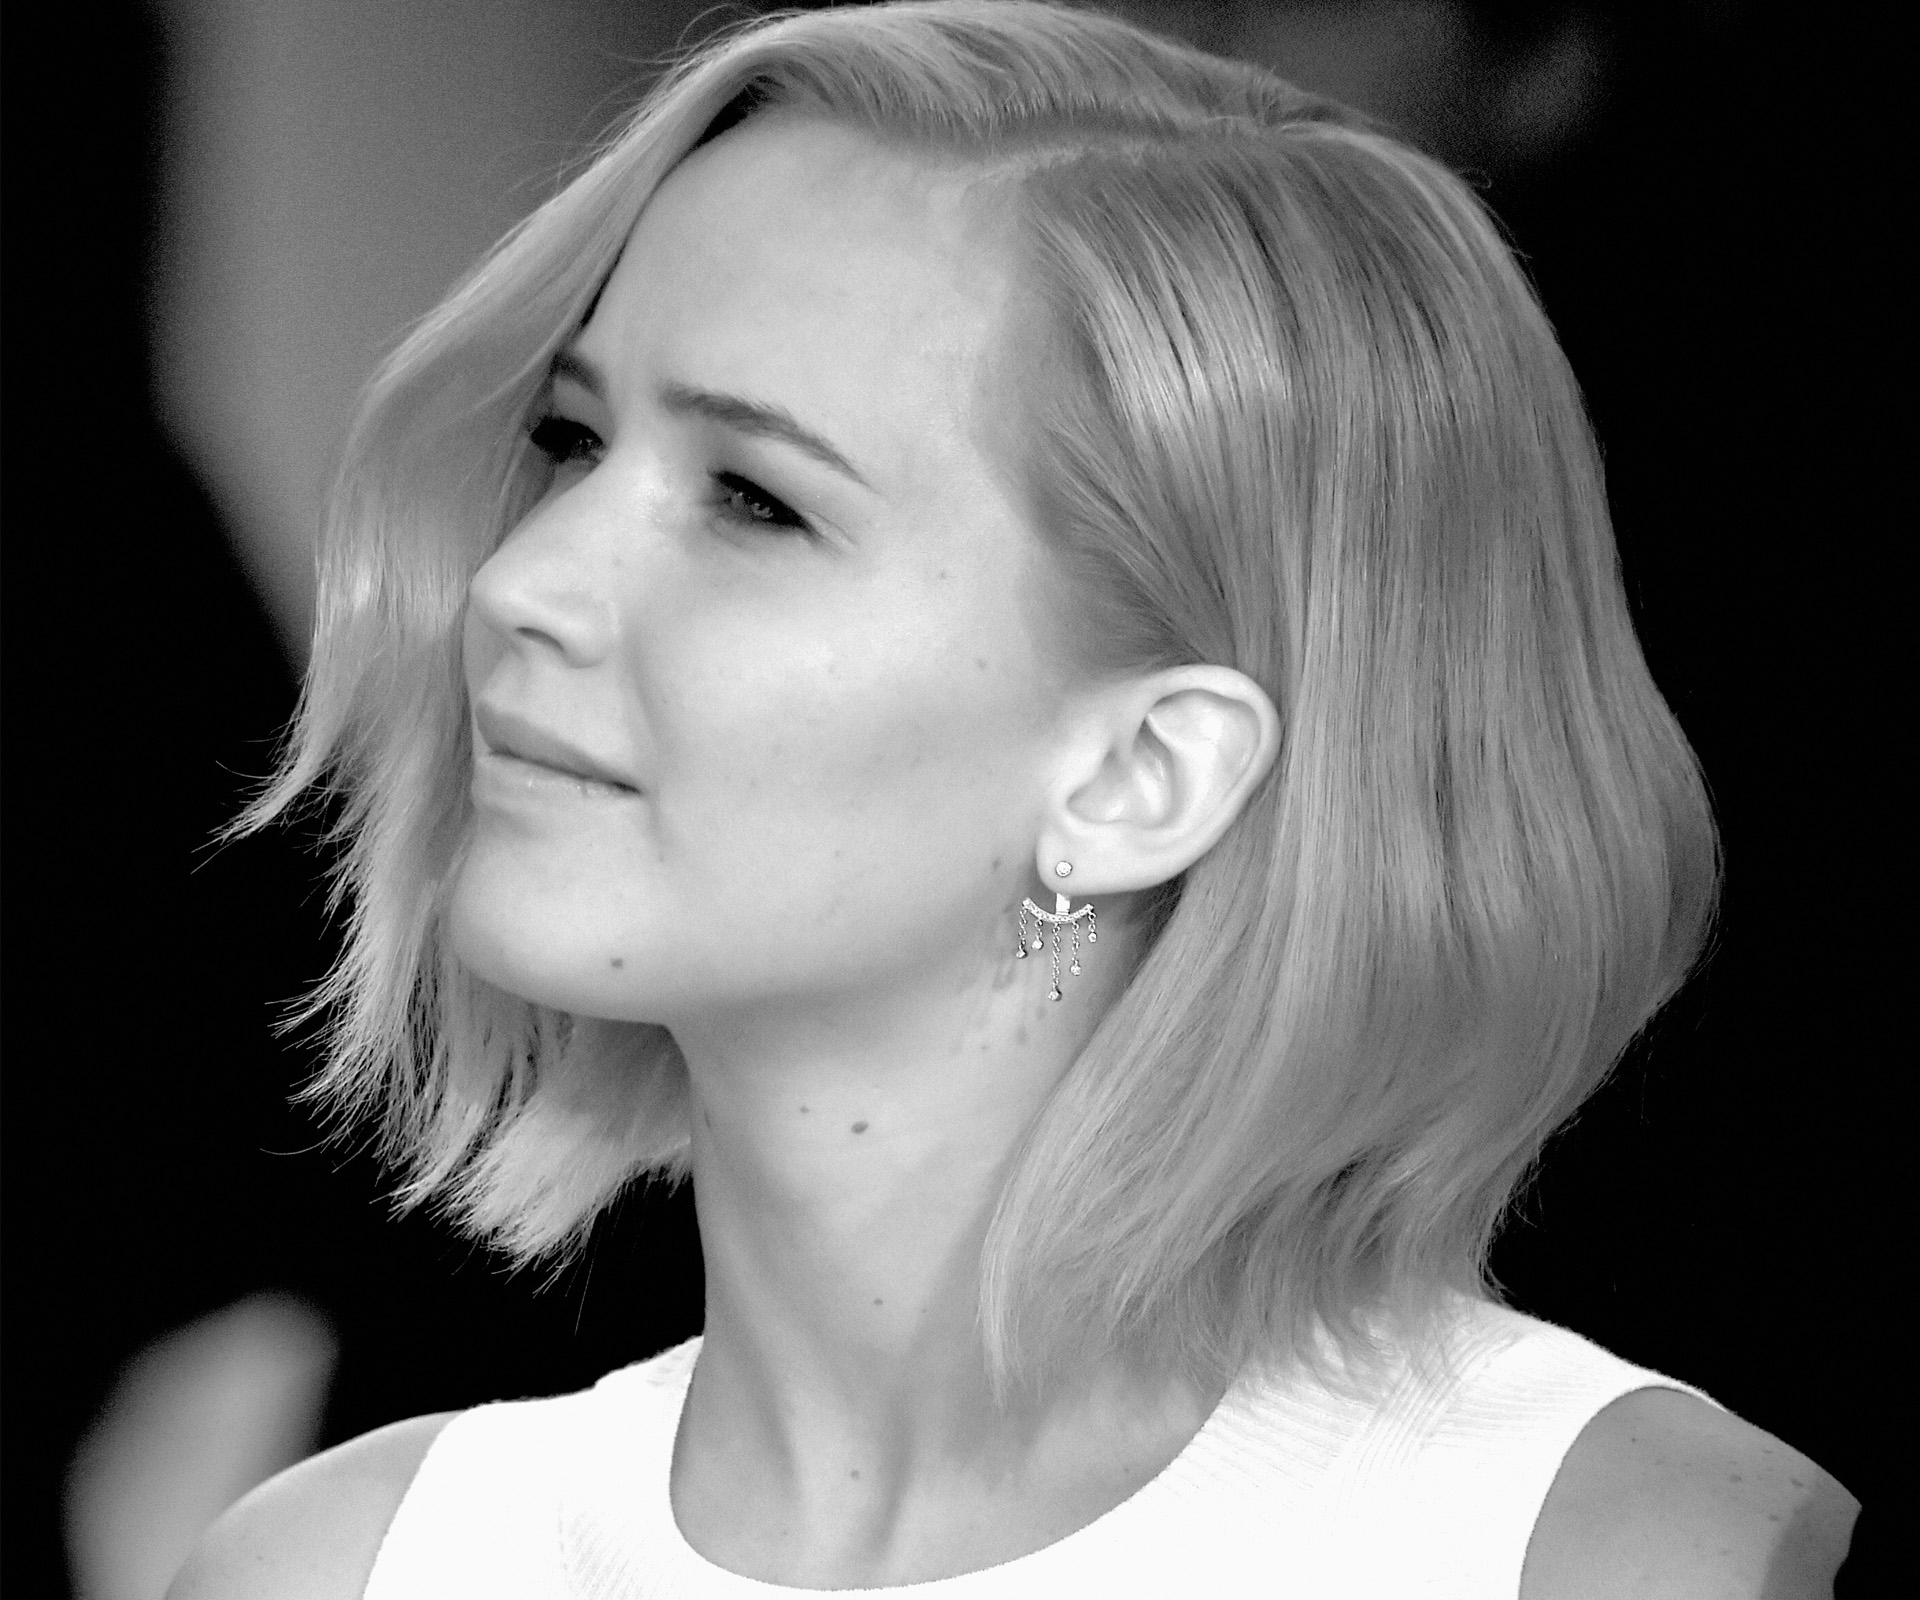 Jennifer Lawrence hits back after being called a ‘brat’